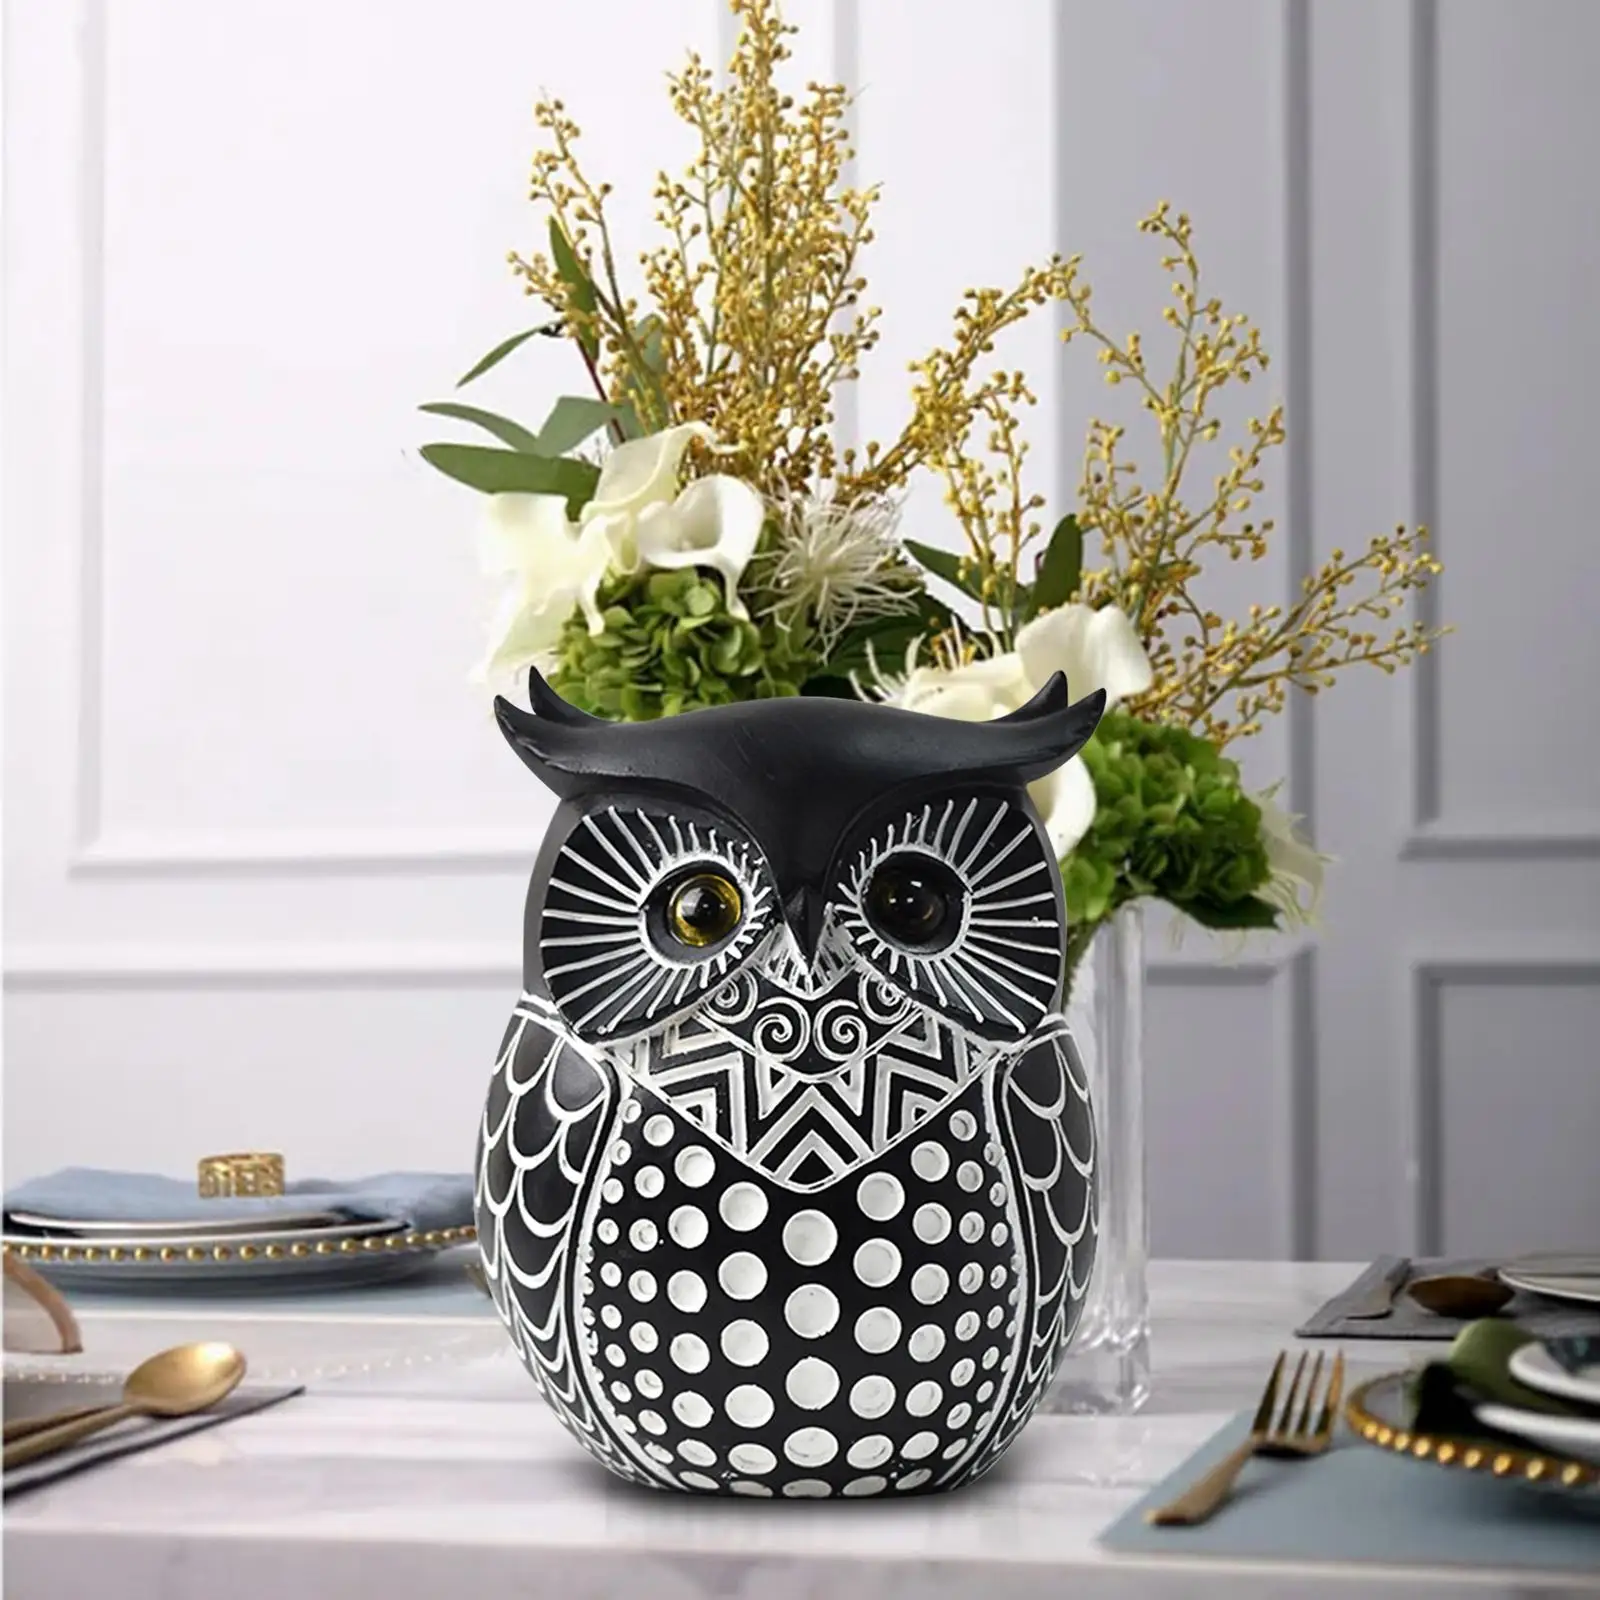 Owl Statue Home Decor Cute Crafts Animal Sculpture for Mantel Office Bedroom